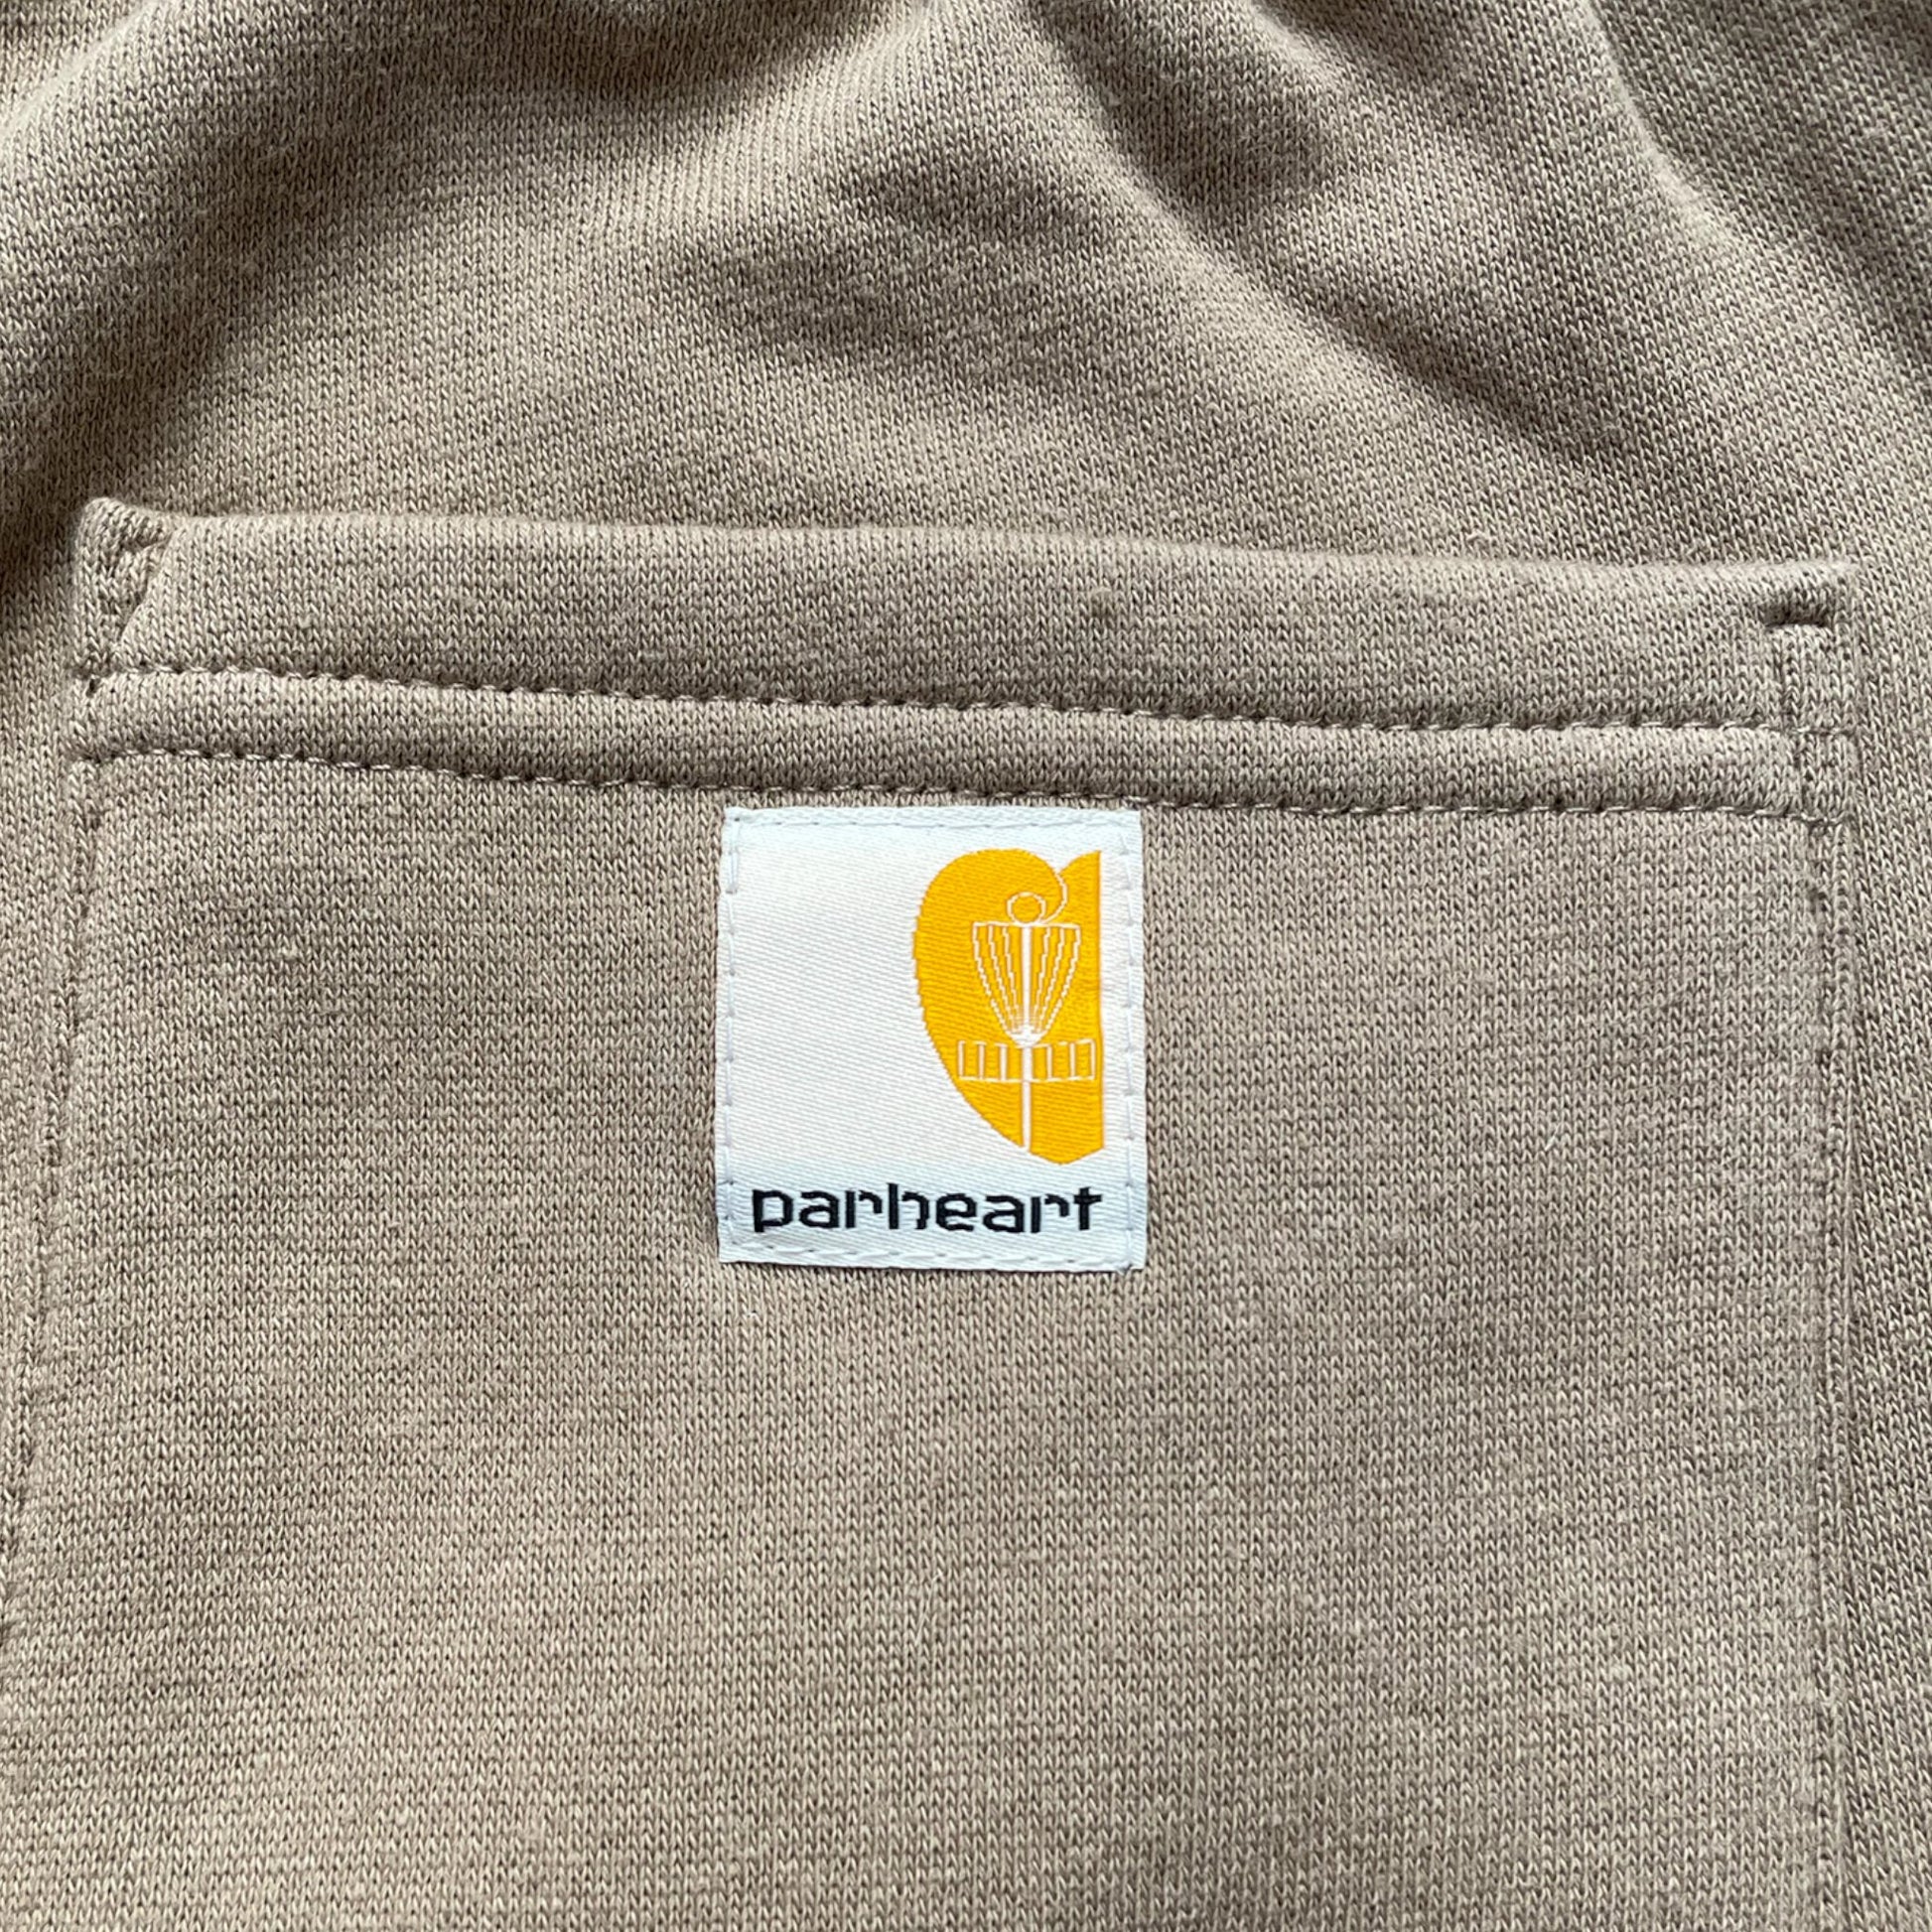 Perks and Re-creation Parheart Sweatpants Disc Golf